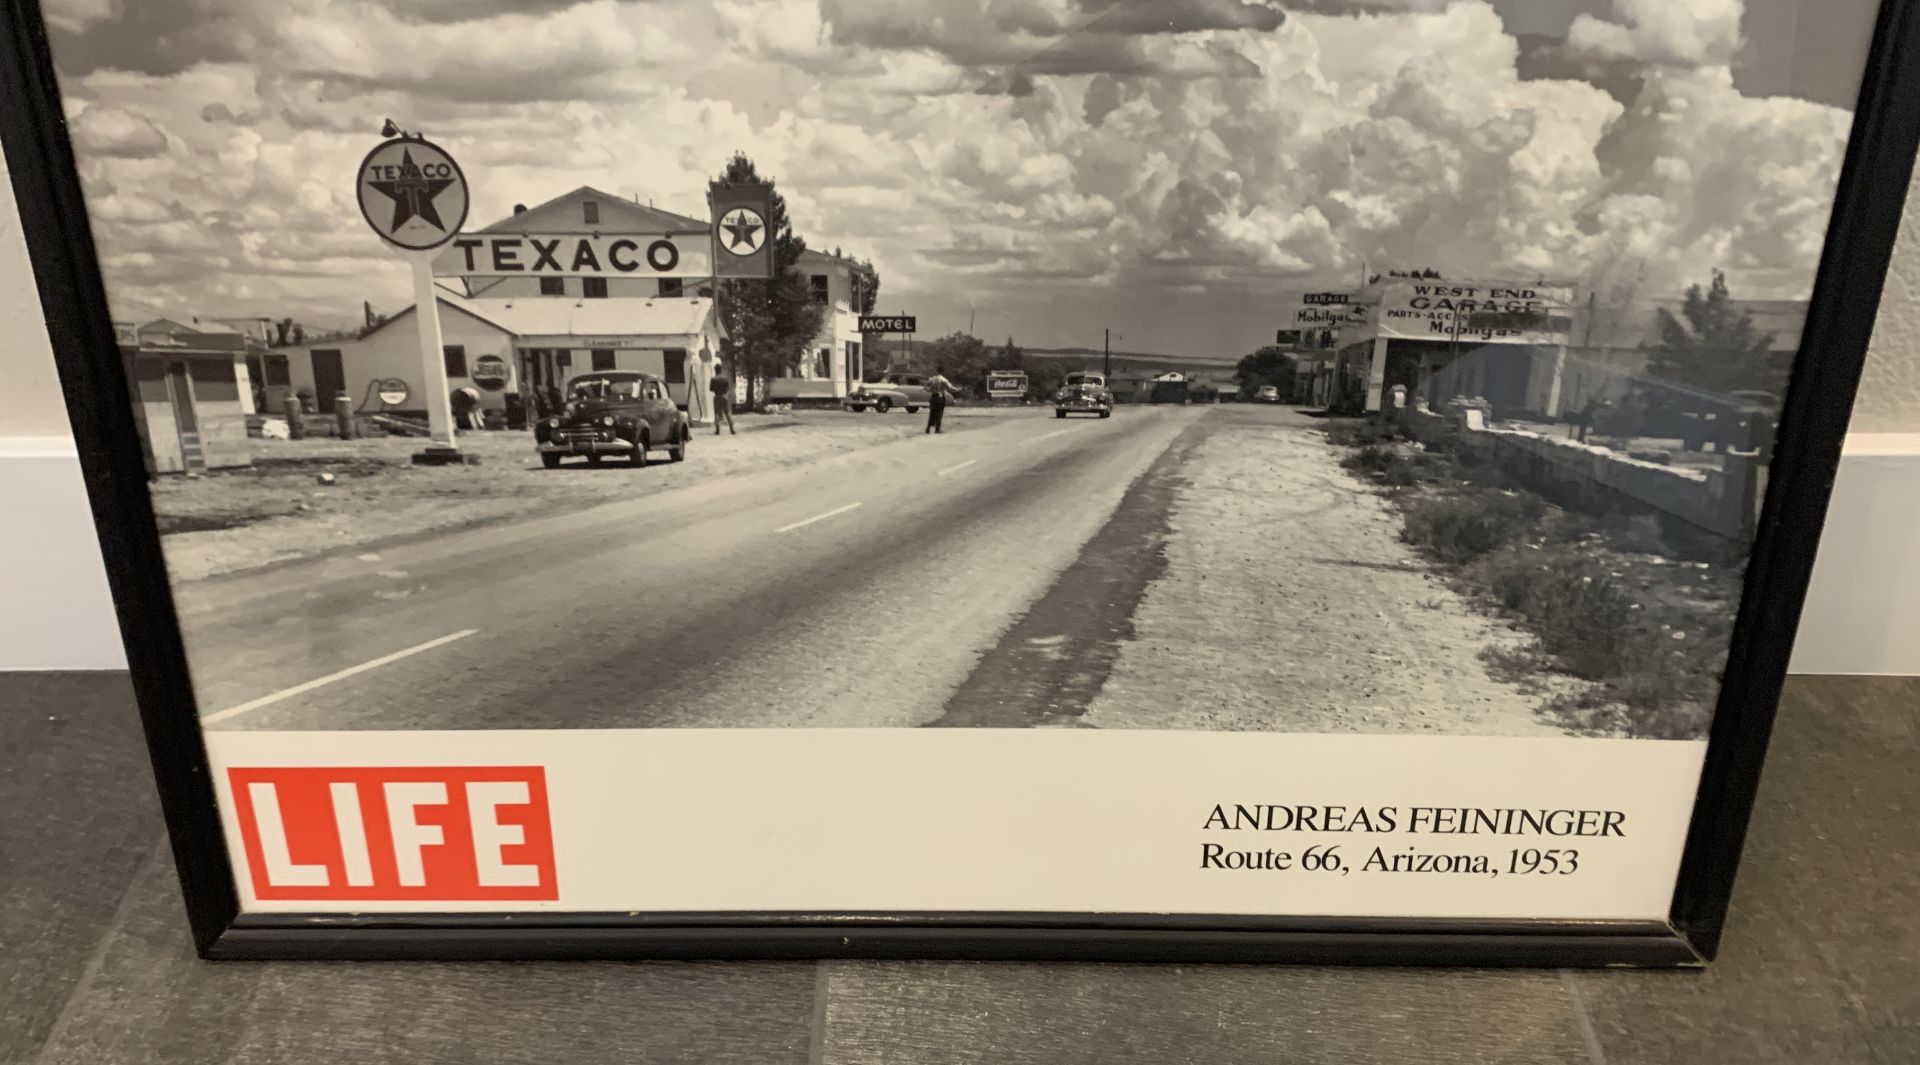 ANDREAS FEININGER ROUTE 66, ARIZONA 1953 TIME LIFE HIGHLY COLLECTIBLE RARE FRAMED COVER ART 24.5X35" - Image 3 of 5